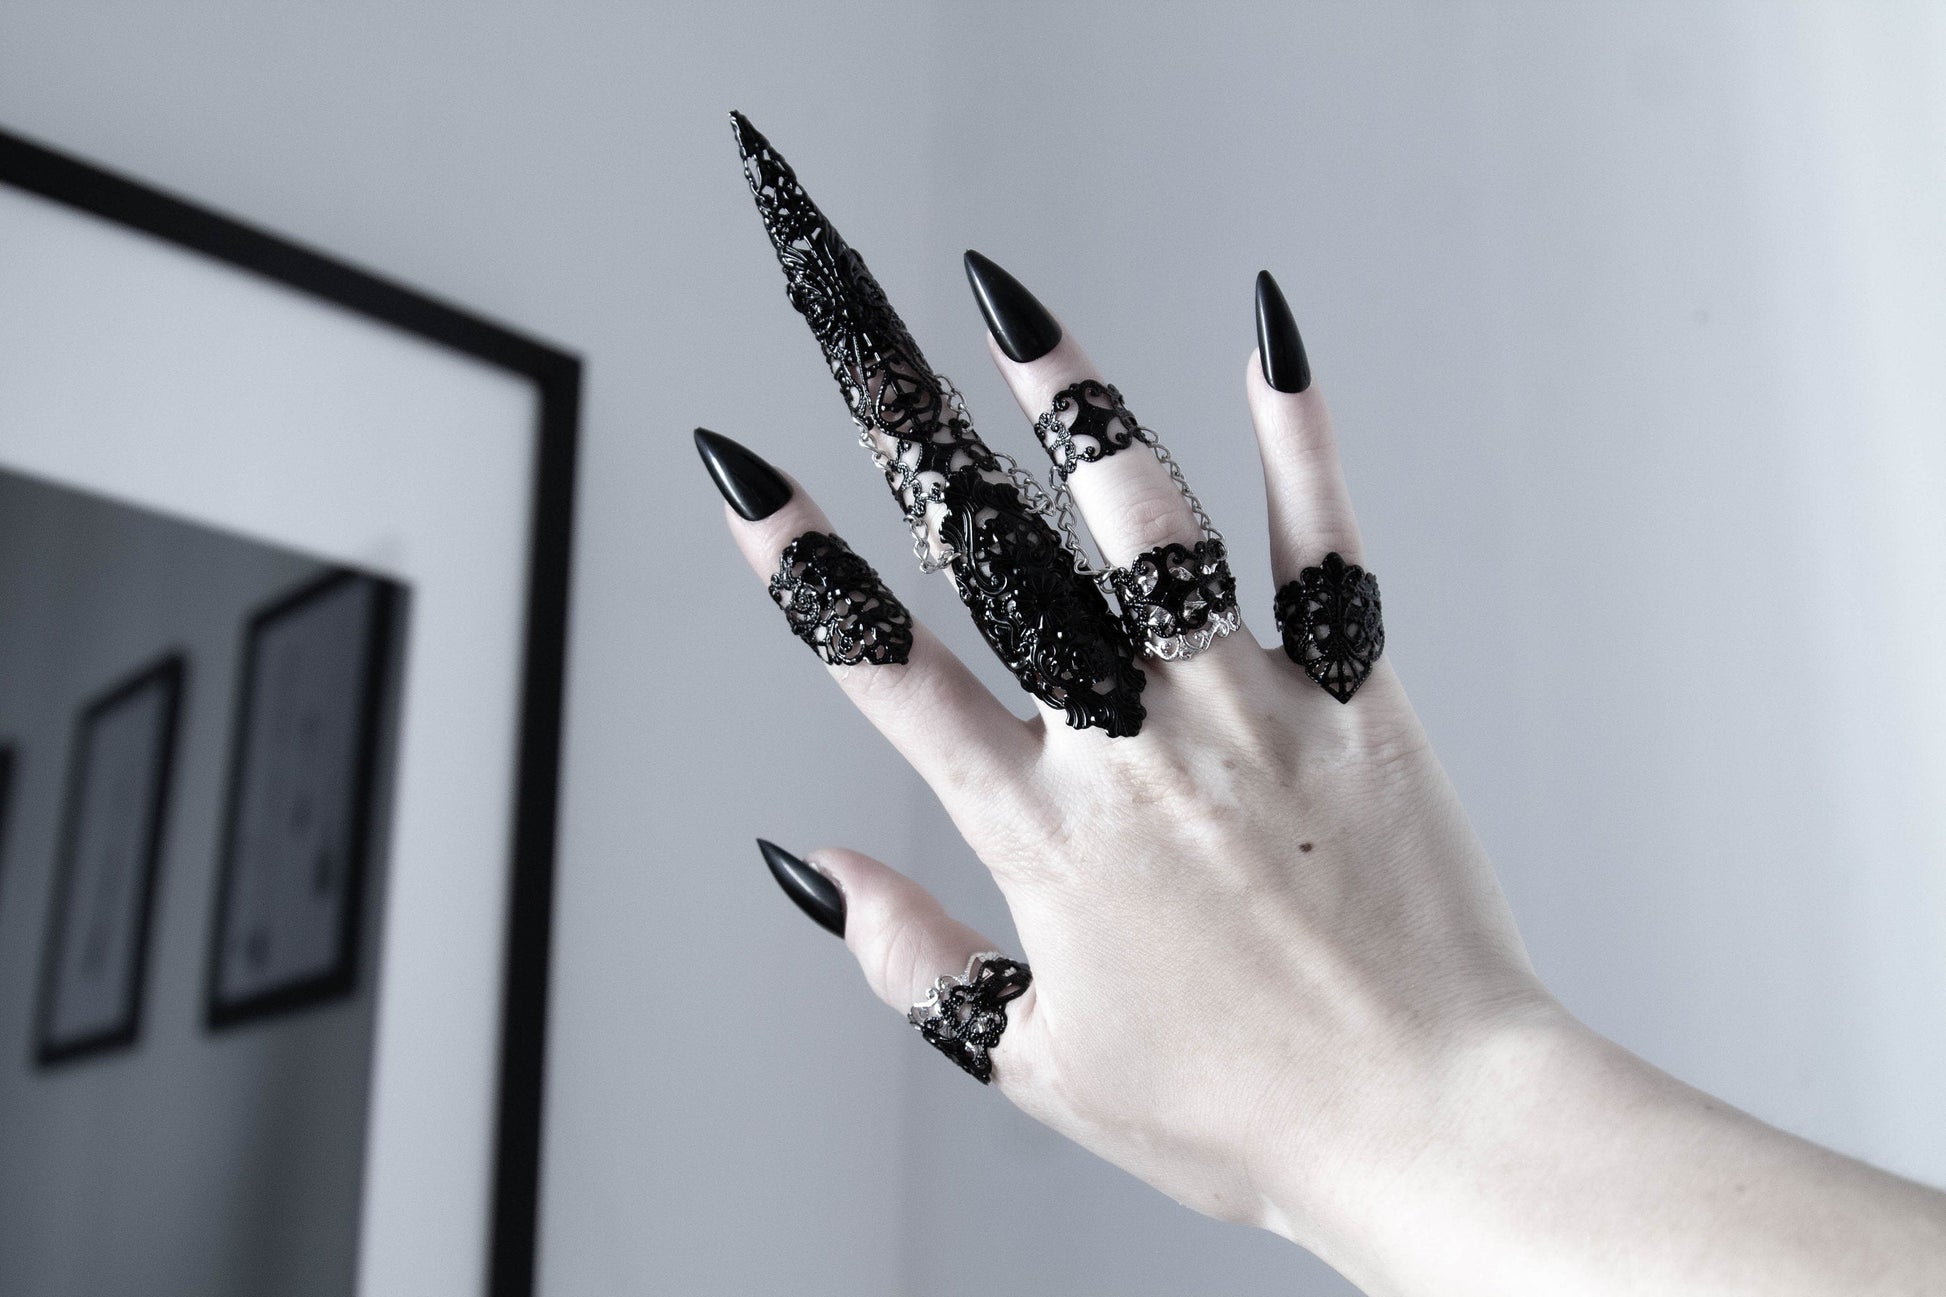 Adorn your hands with the dark allure of Myril Jewels' filigree rings, each piece a wearable work of art perfect for those with a passion for gothic and alternative styles. These rings, ranging from elegant bands to statement armor-like designs connected by delicate chains, are meticulously handcrafted, resonating with the Neo Gothic, Gothic-chic, and Witchcore aesthetics, making them an essential accessory for Halloween, everyday wear, or as a bold punk statement